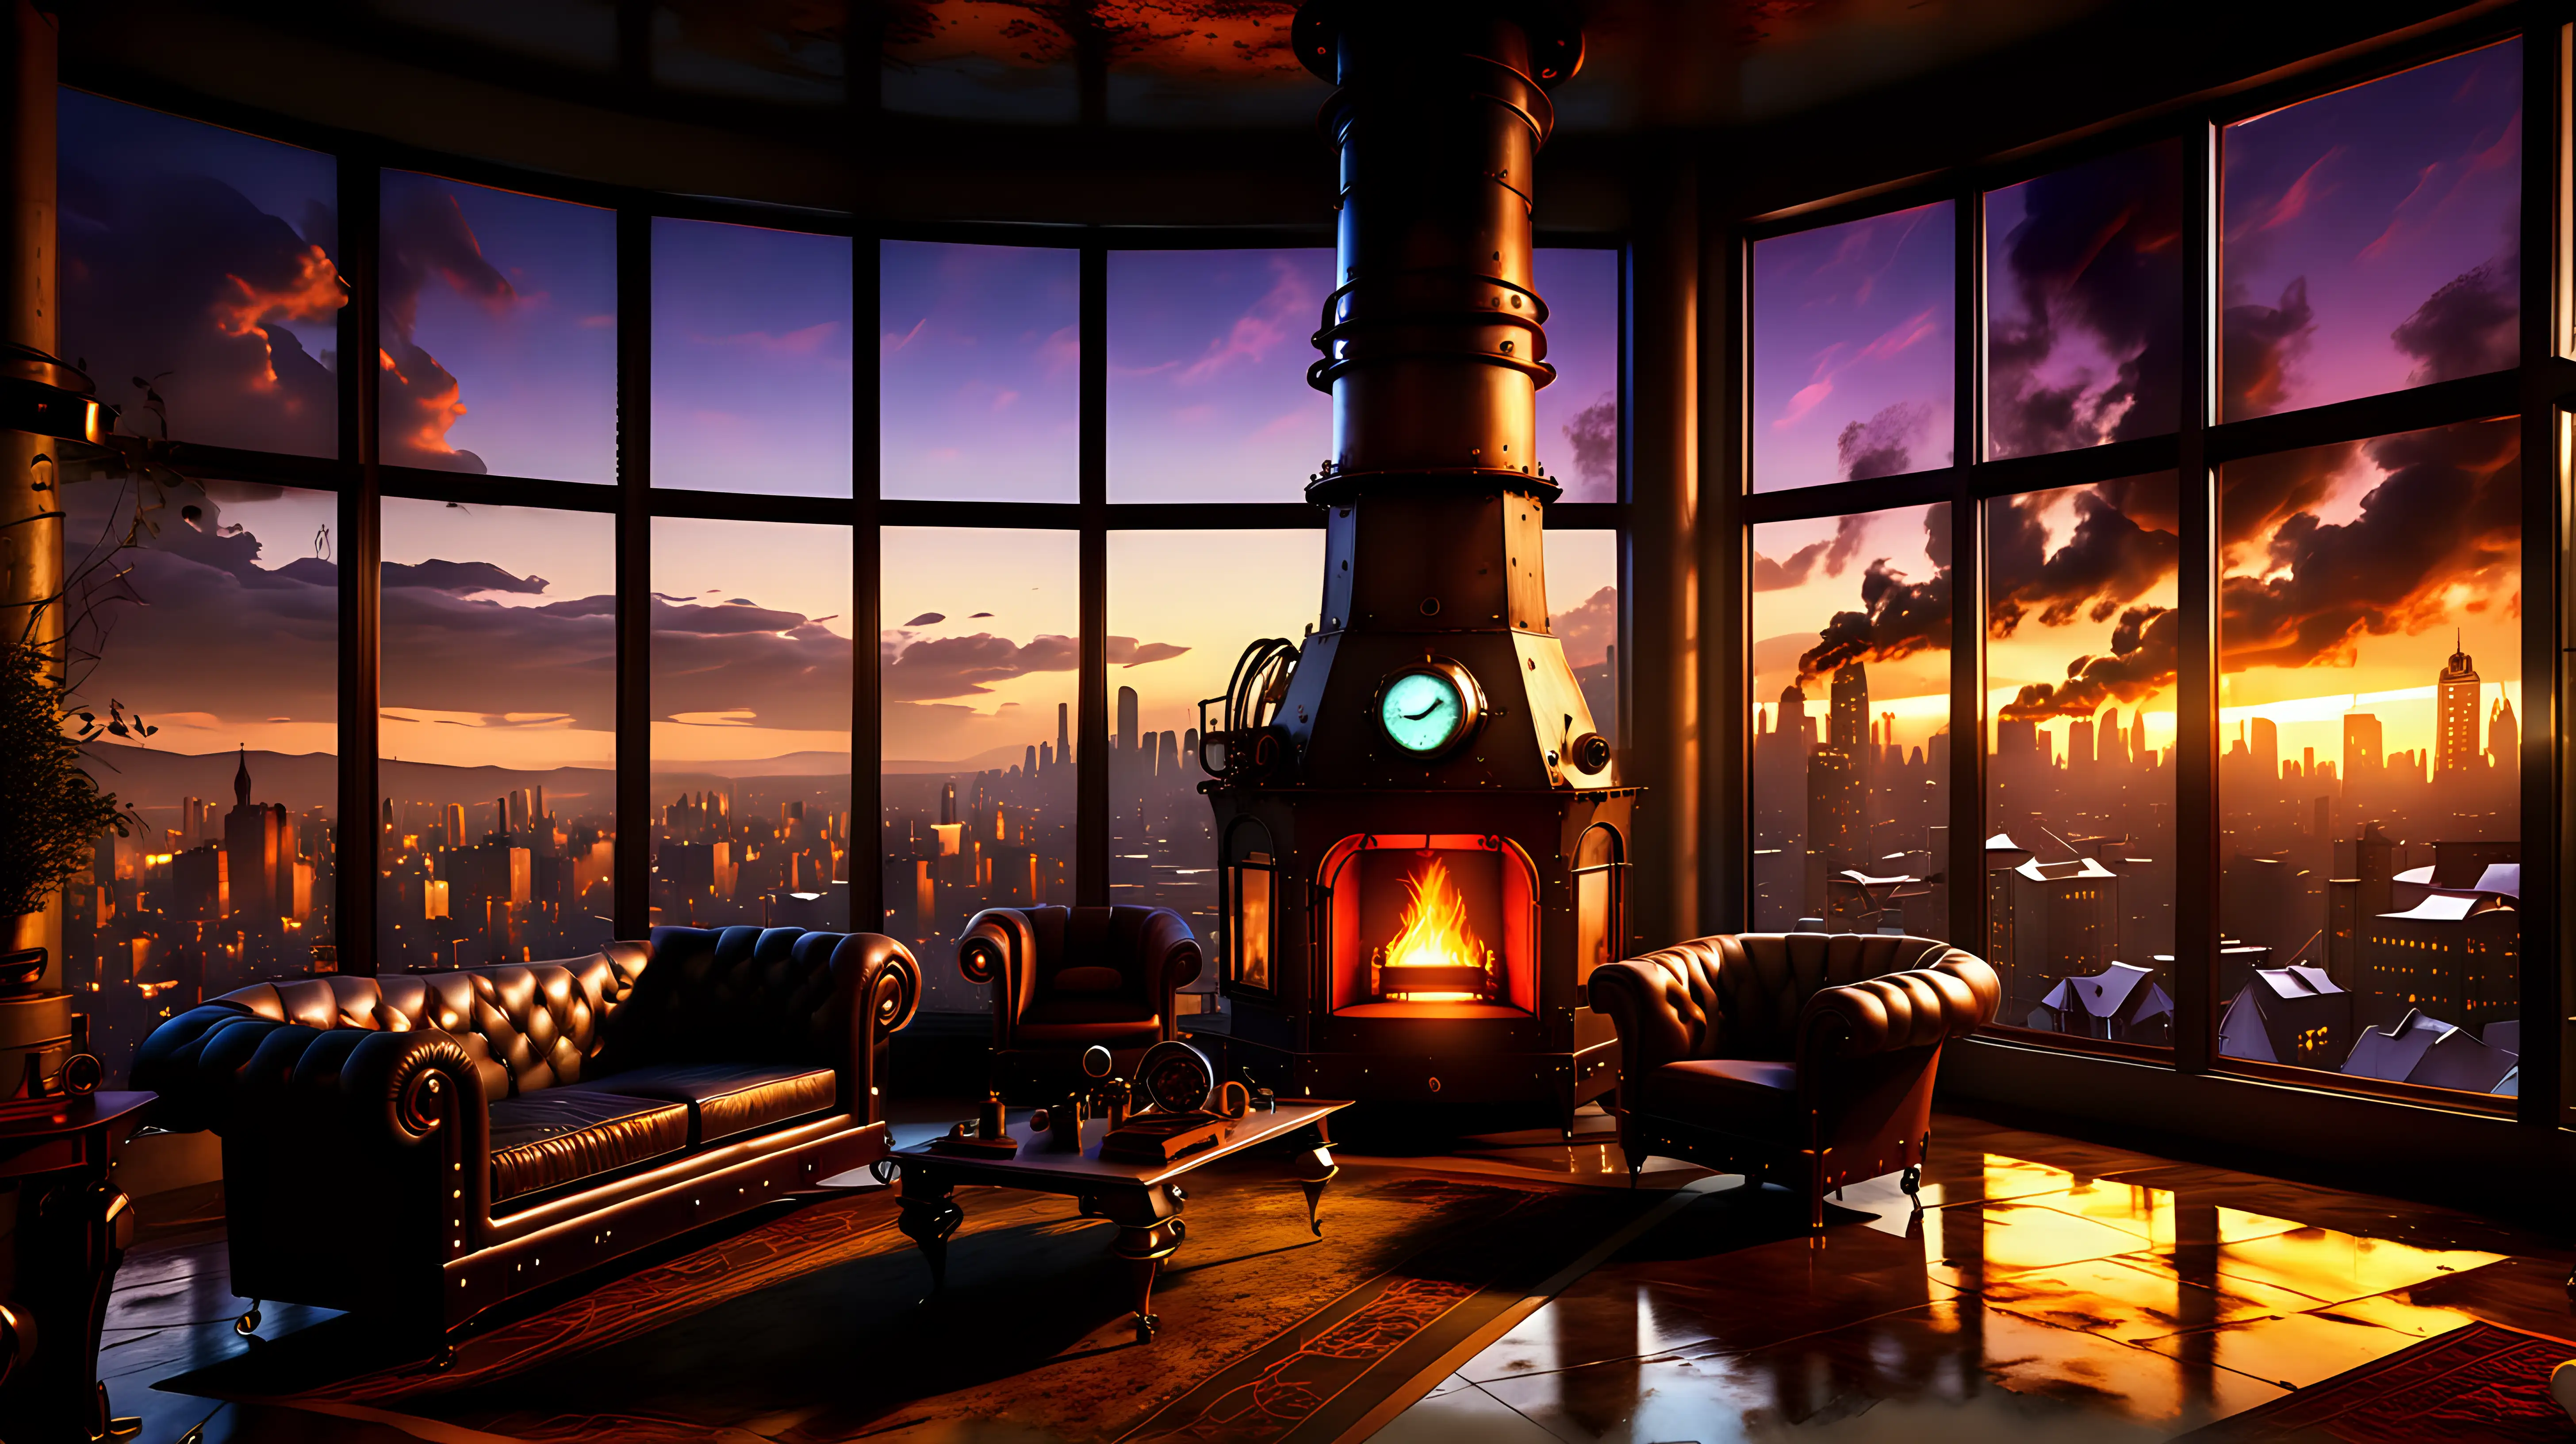 An upscale Steampunk living room at twilight with one fireplace and large window looking out on a vast city. Dramatic lighting, photographic quality.